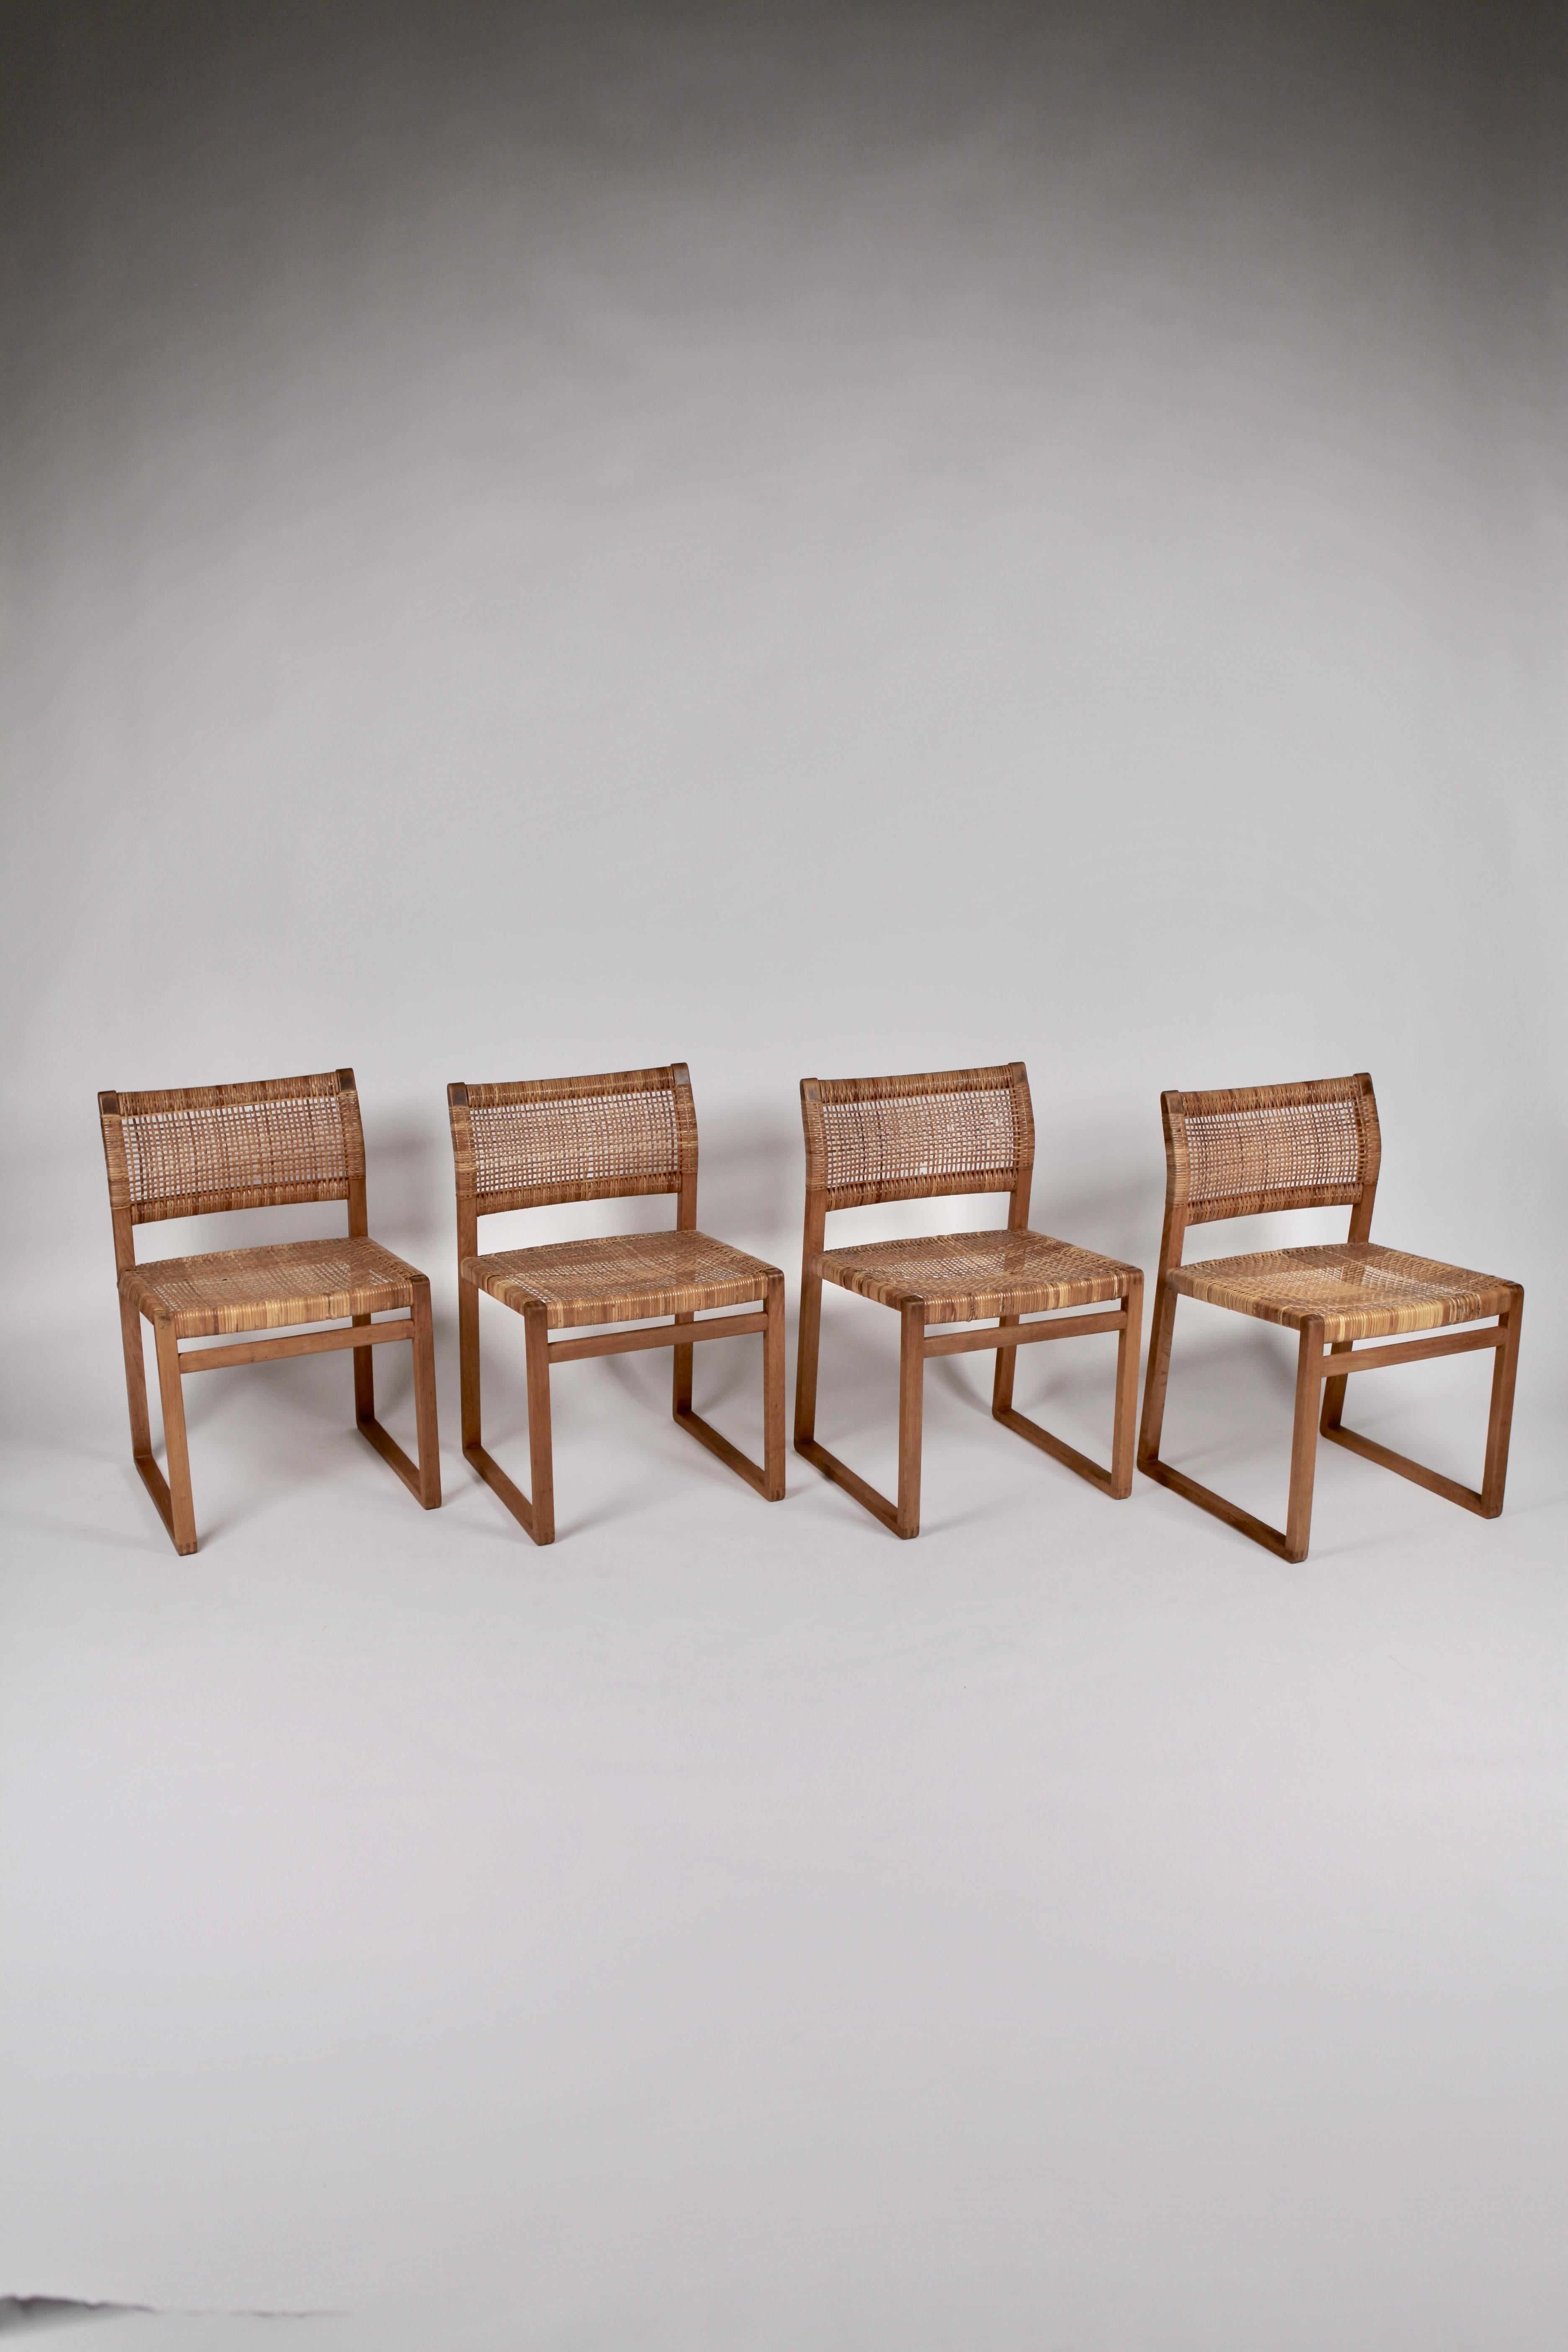 Danish Børge Mogensen, Dining Chairs in Oak and Woven Cane, Denmark, 1957